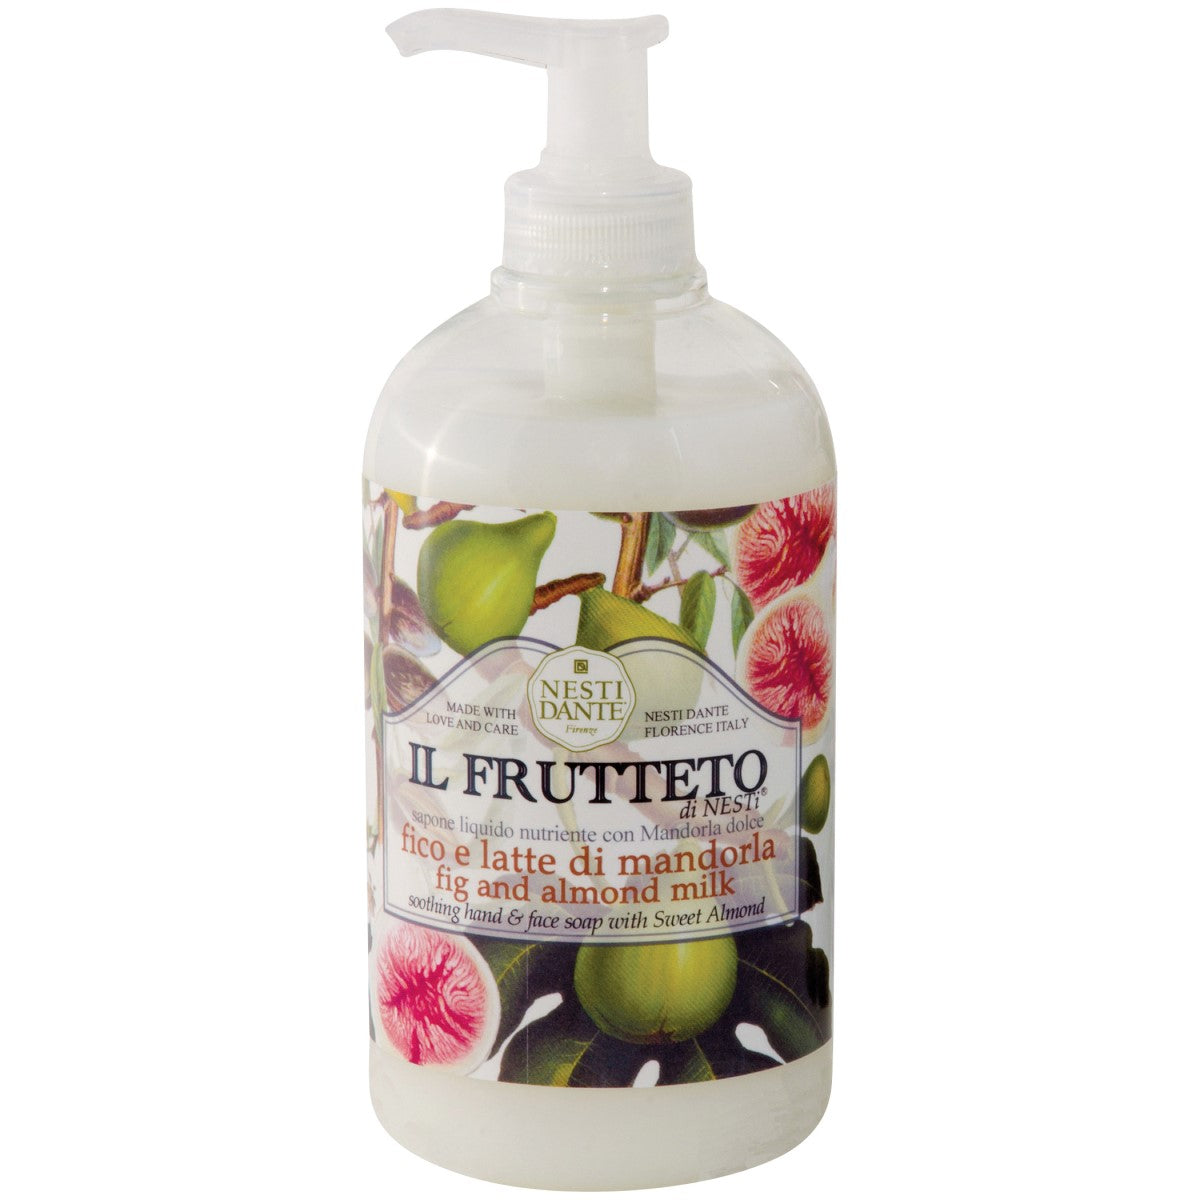 Primary Image of Il Frutteto Fig and Almond Milk Hand Gel